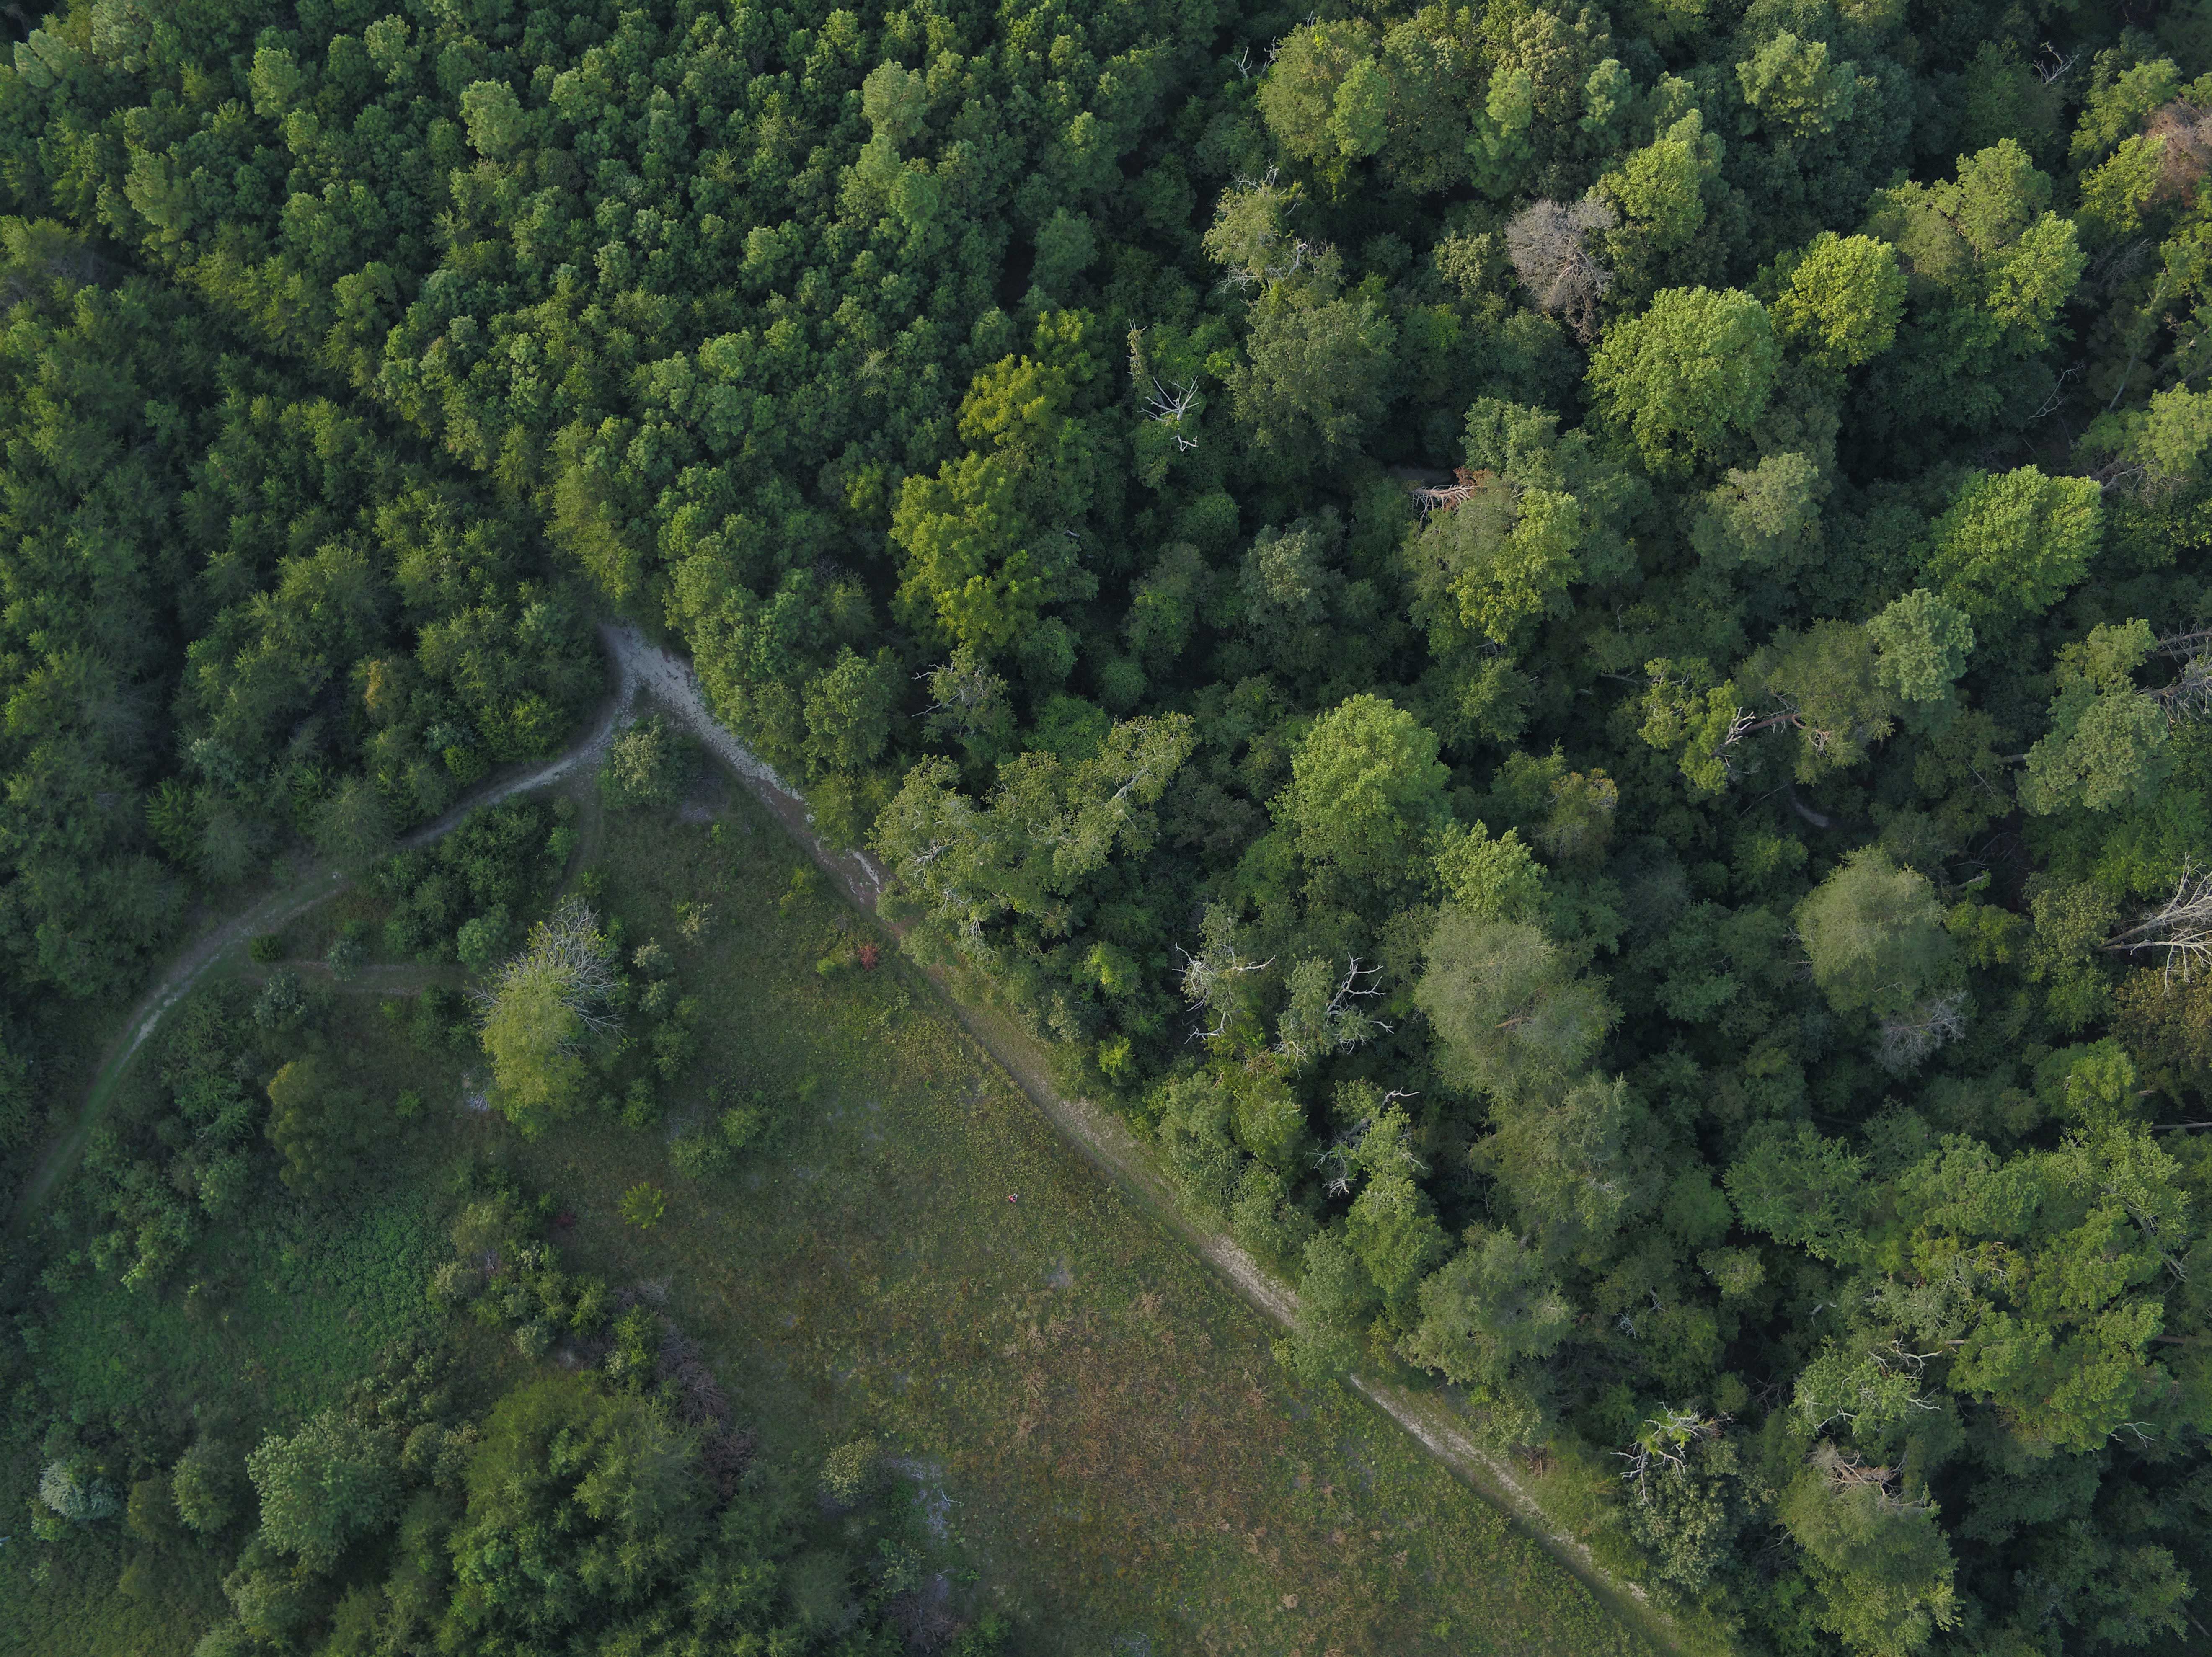 An aerial view of the Maurice River Bluffs forests.